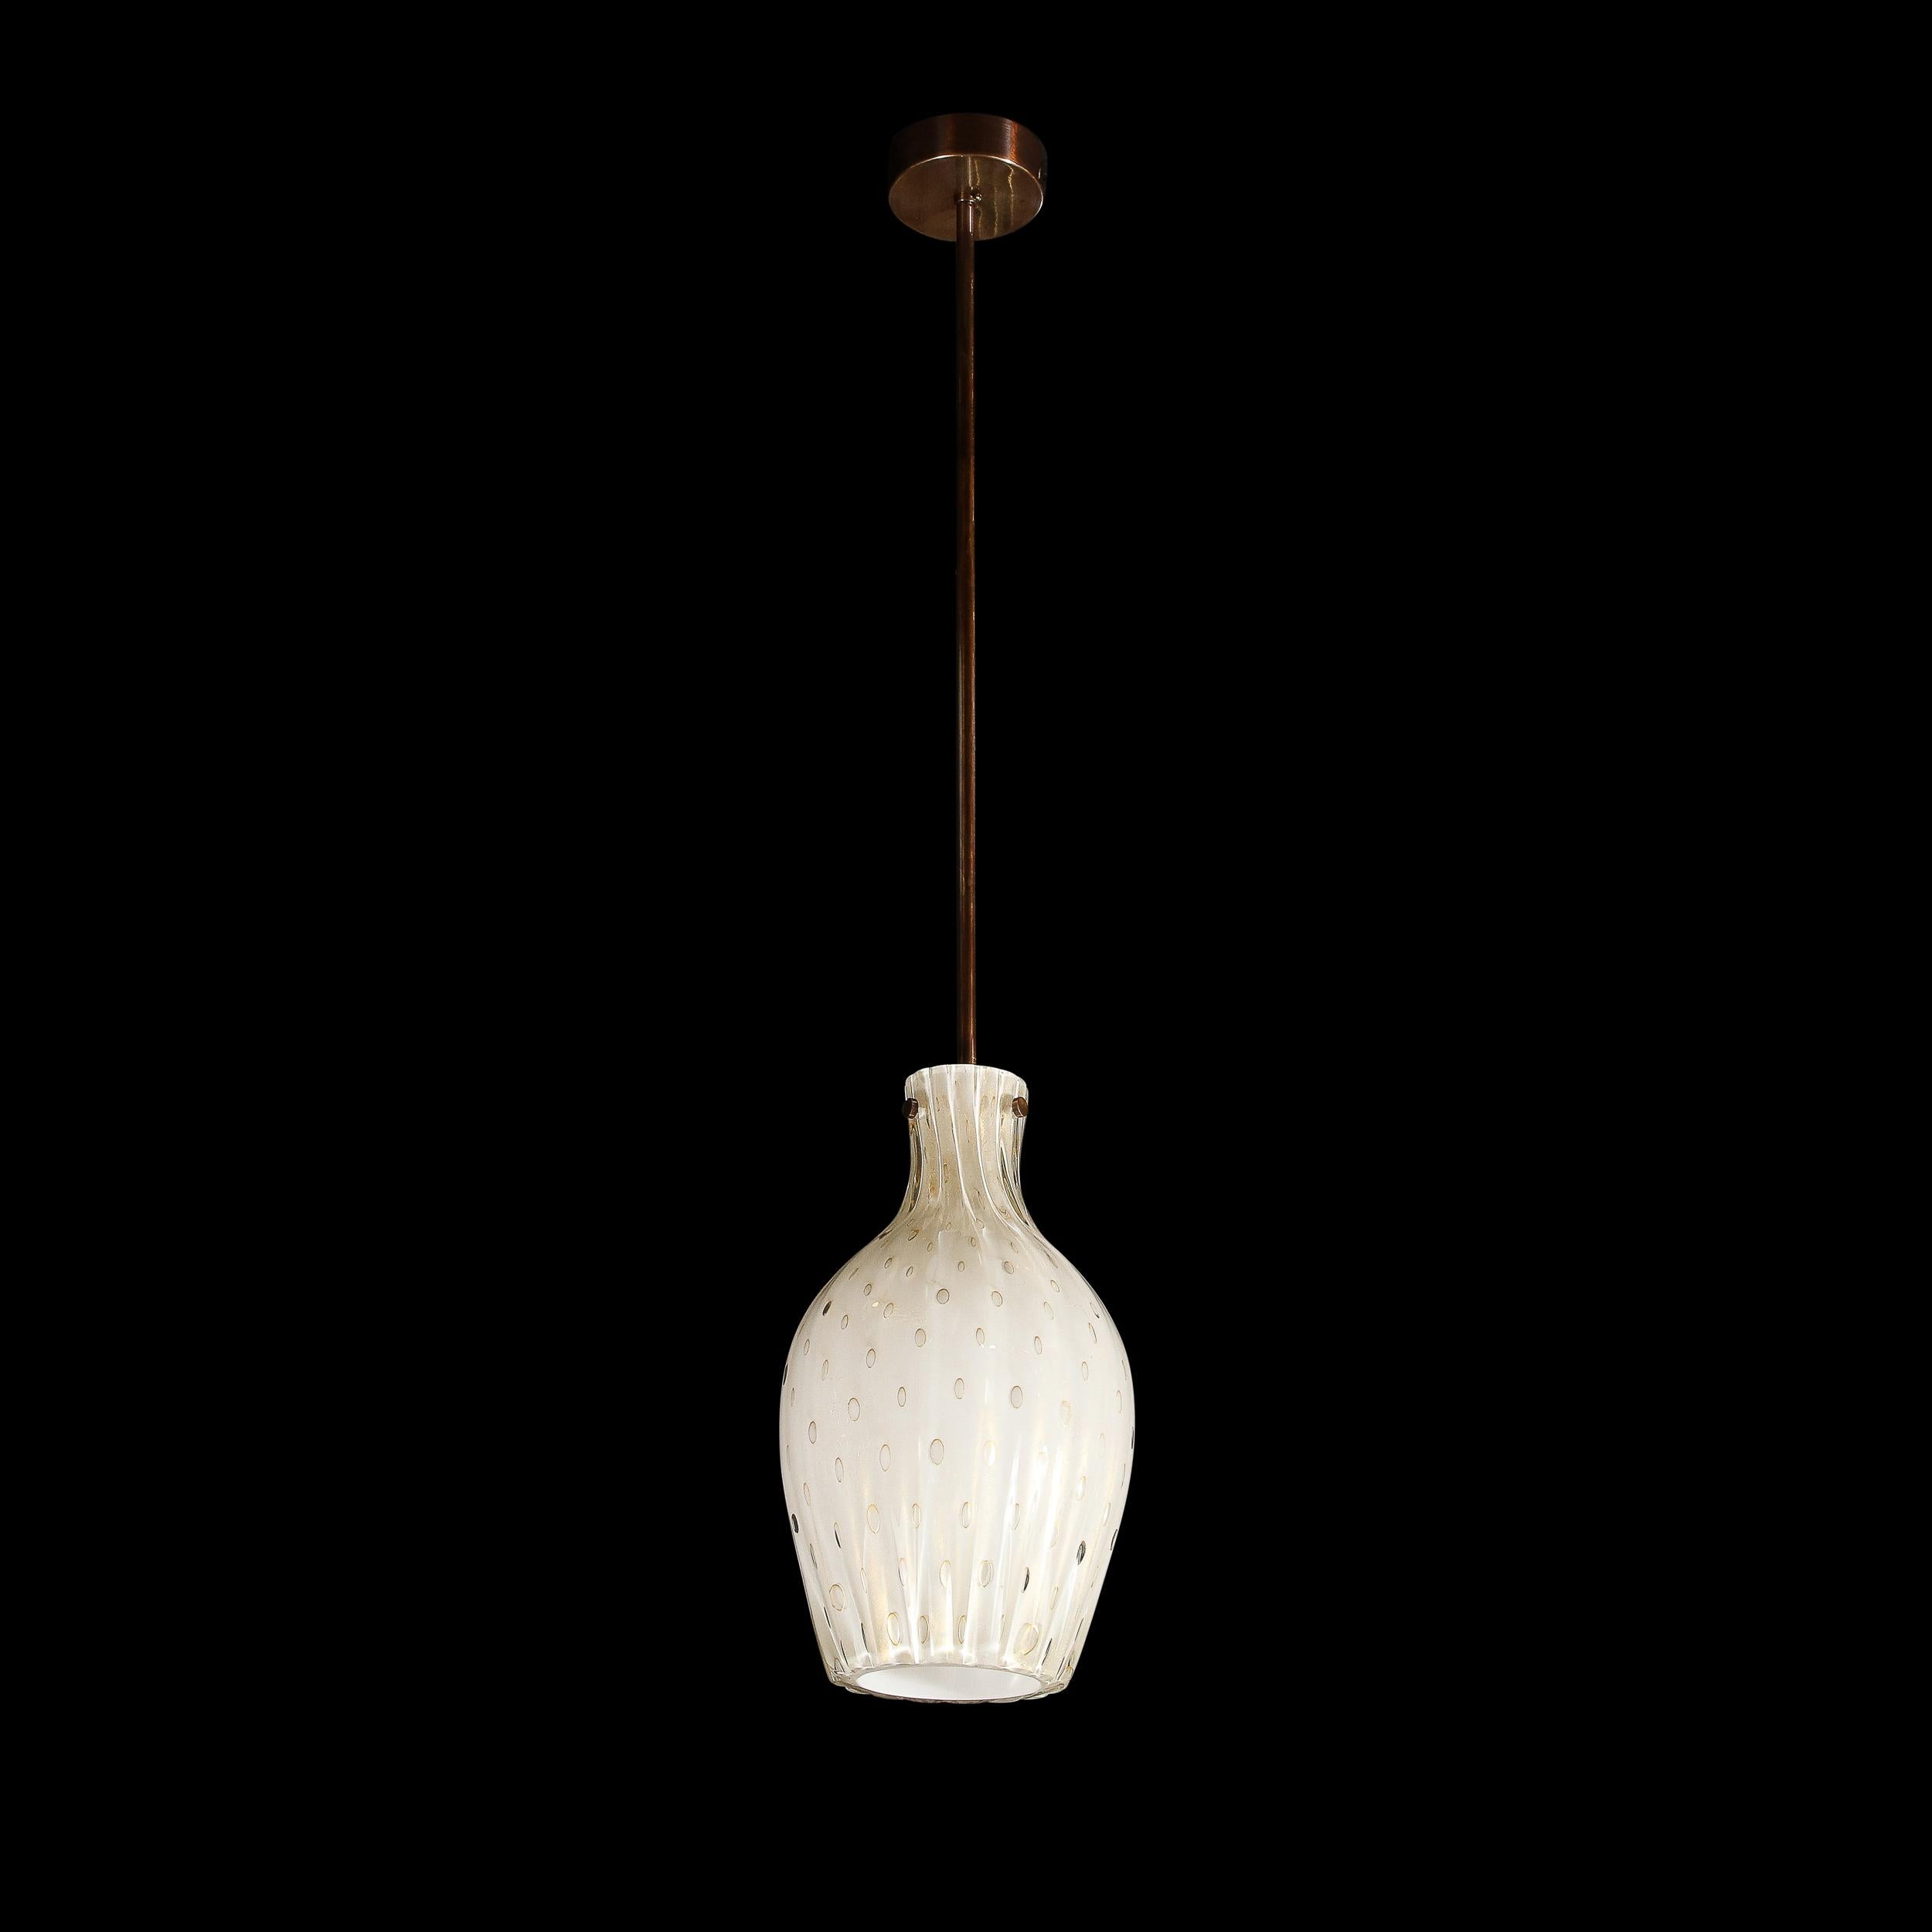 This elegant modernist pendant was handblown in Murano, Italy- the island off the coast of Venice renowned for centuries for its superlative glass production. It features a billowing, sinuously curved shade that recedes to a tapered neck and also